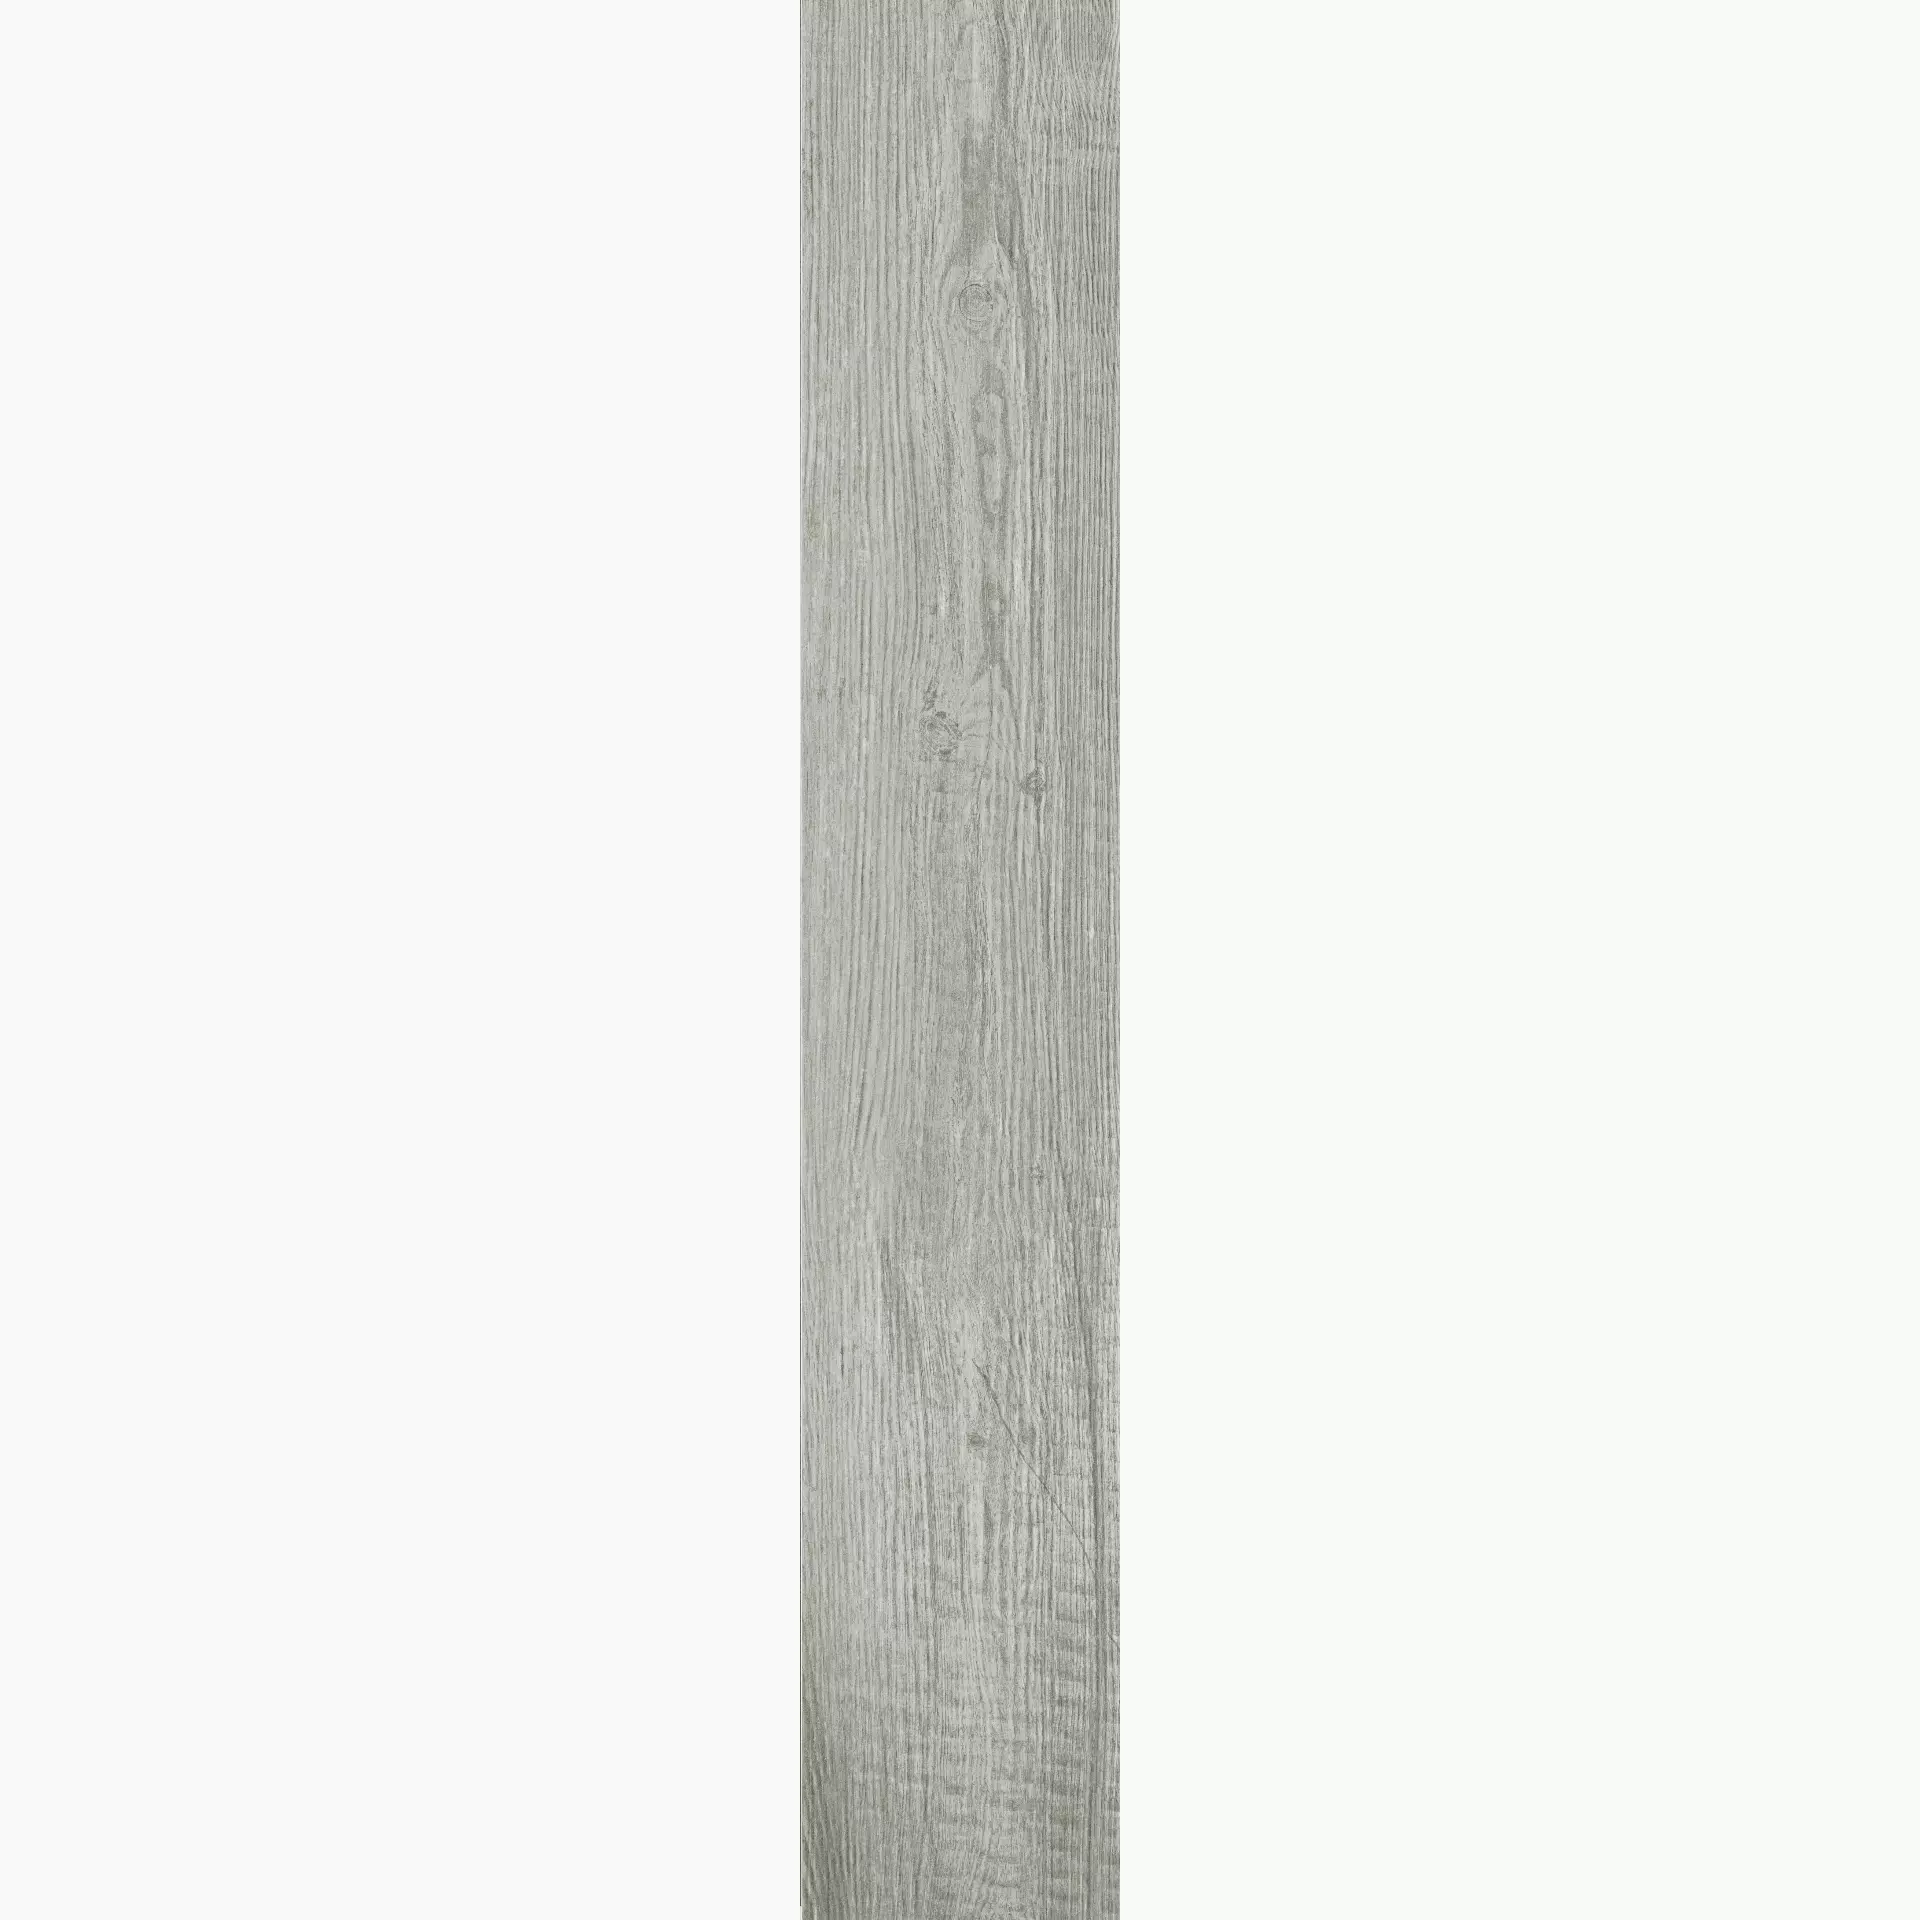 Serenissima Norway Natural Feel Naturale 1050641 20x120cm rectified 9,5mm